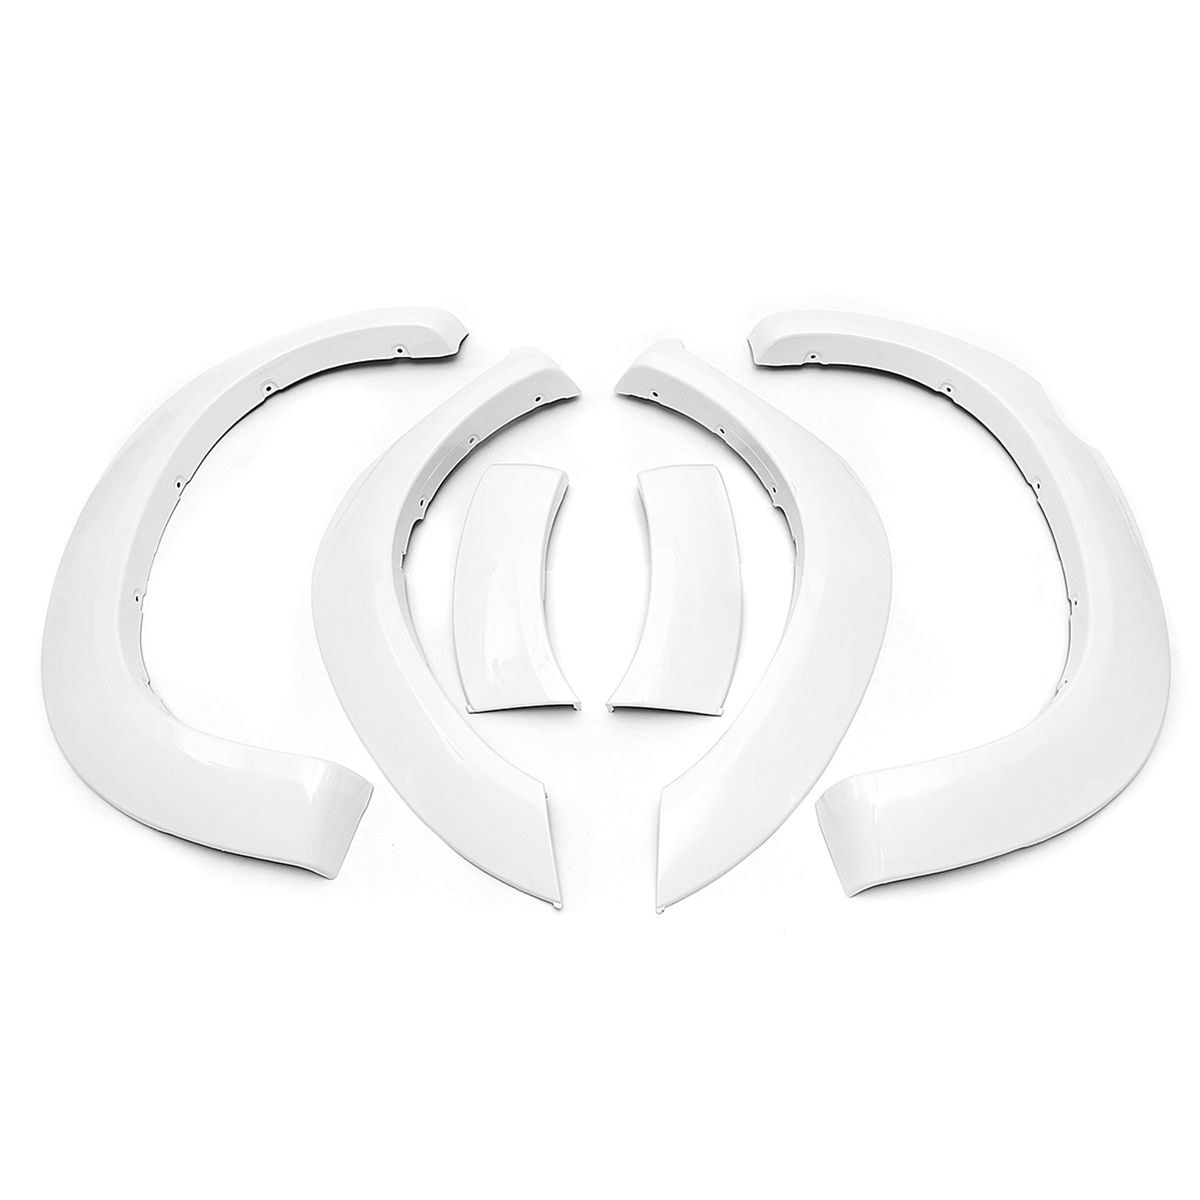 Pair-New-White-Front-Wheel-Fender-Flares-For-Toyota-Hilux-2005-2011-1486018